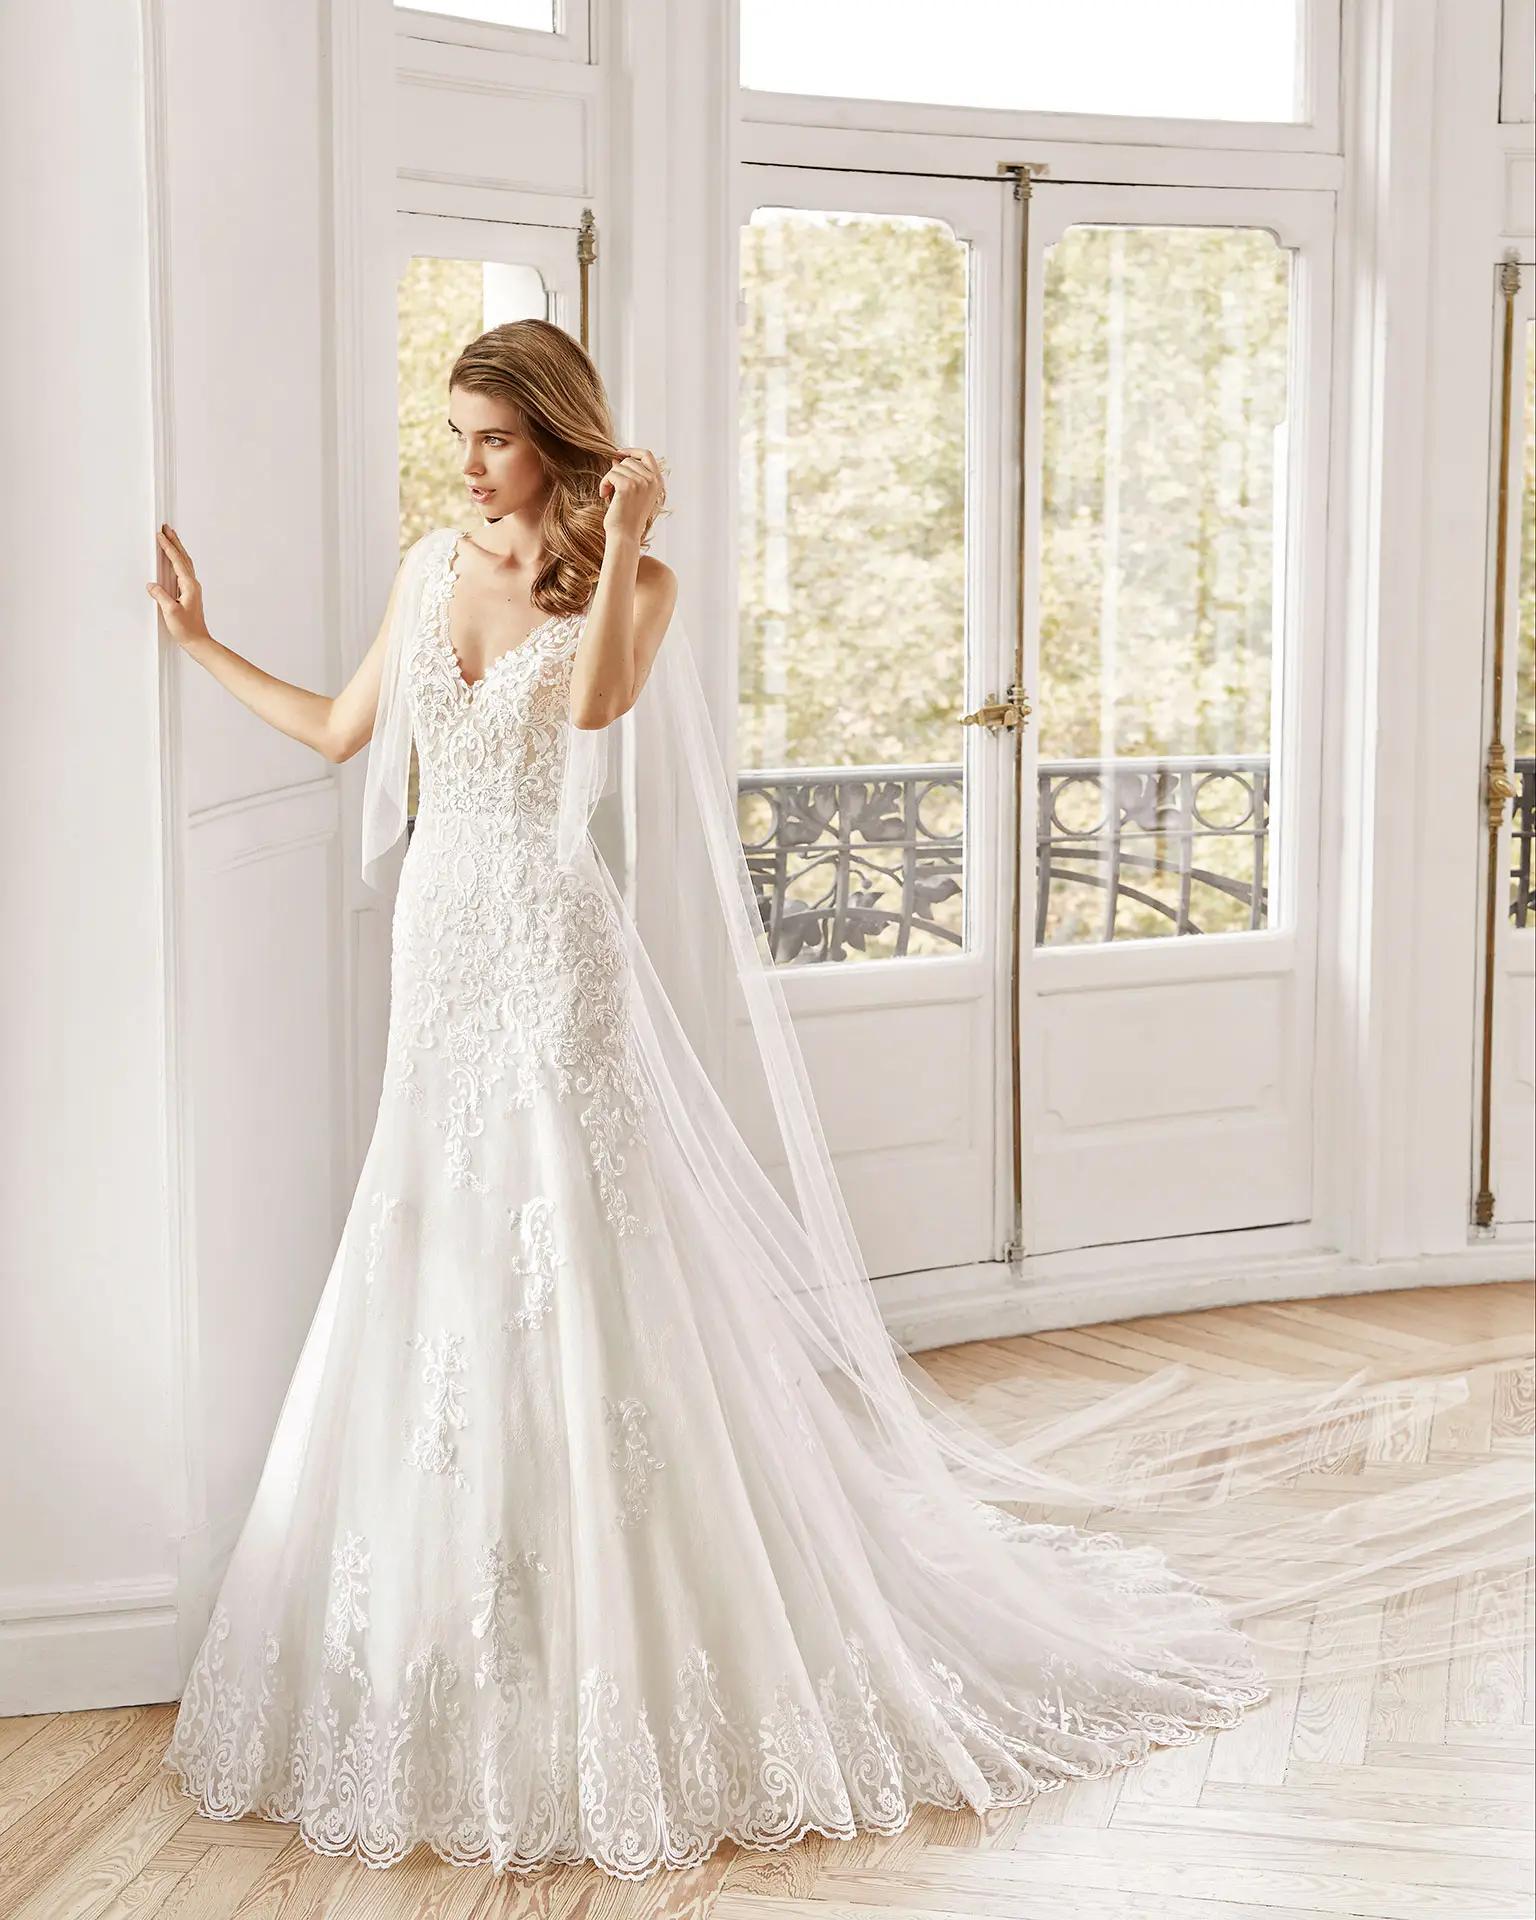 Nipped and Tucked: A Guide to Different Waist Types in Wedding Gowns Image